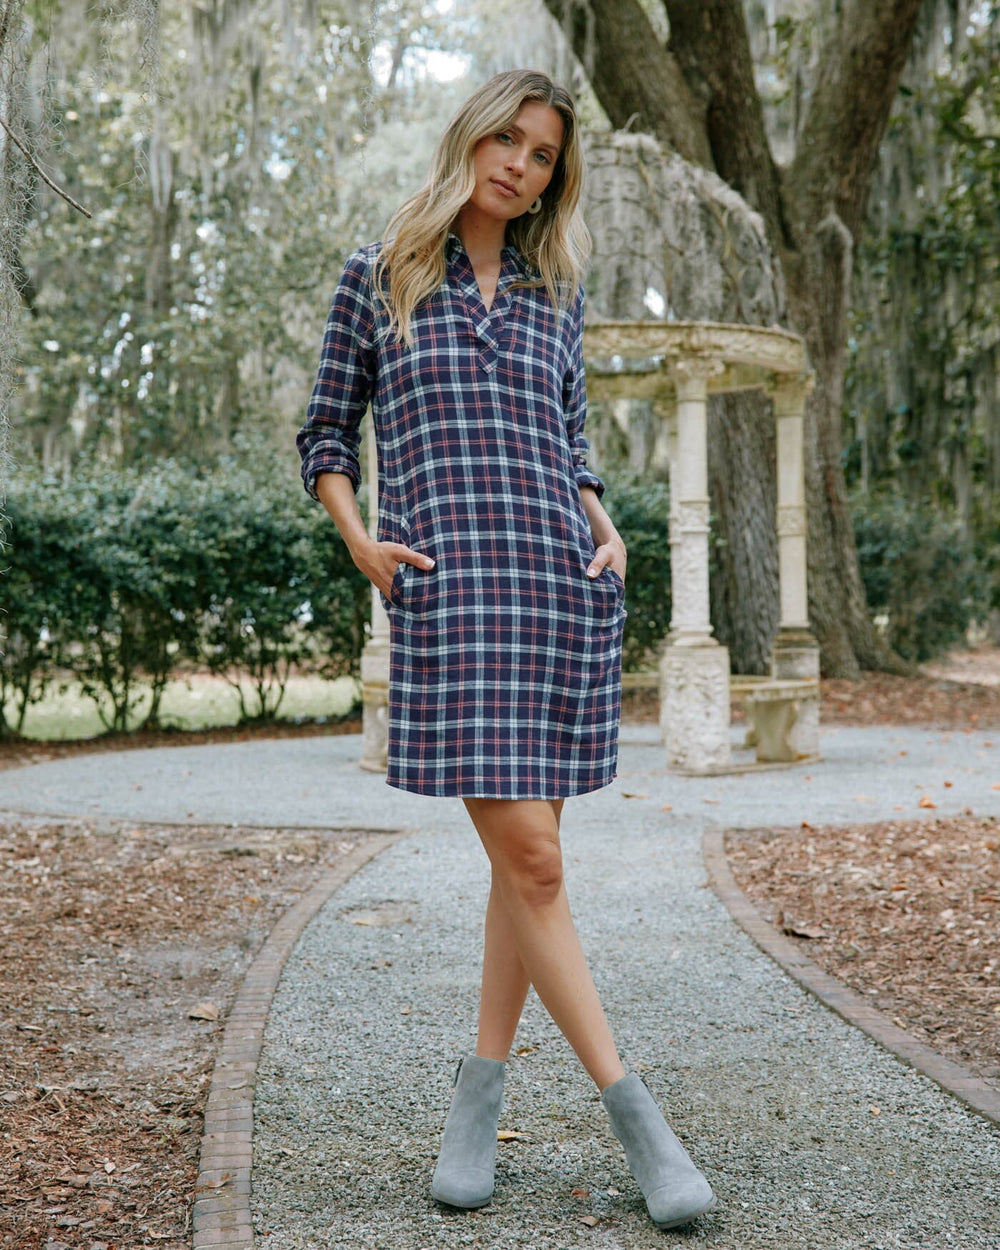 The front view of the Southern Tide Kamryn Chilly Morning Dress by Southern Tide - Nautical Navy